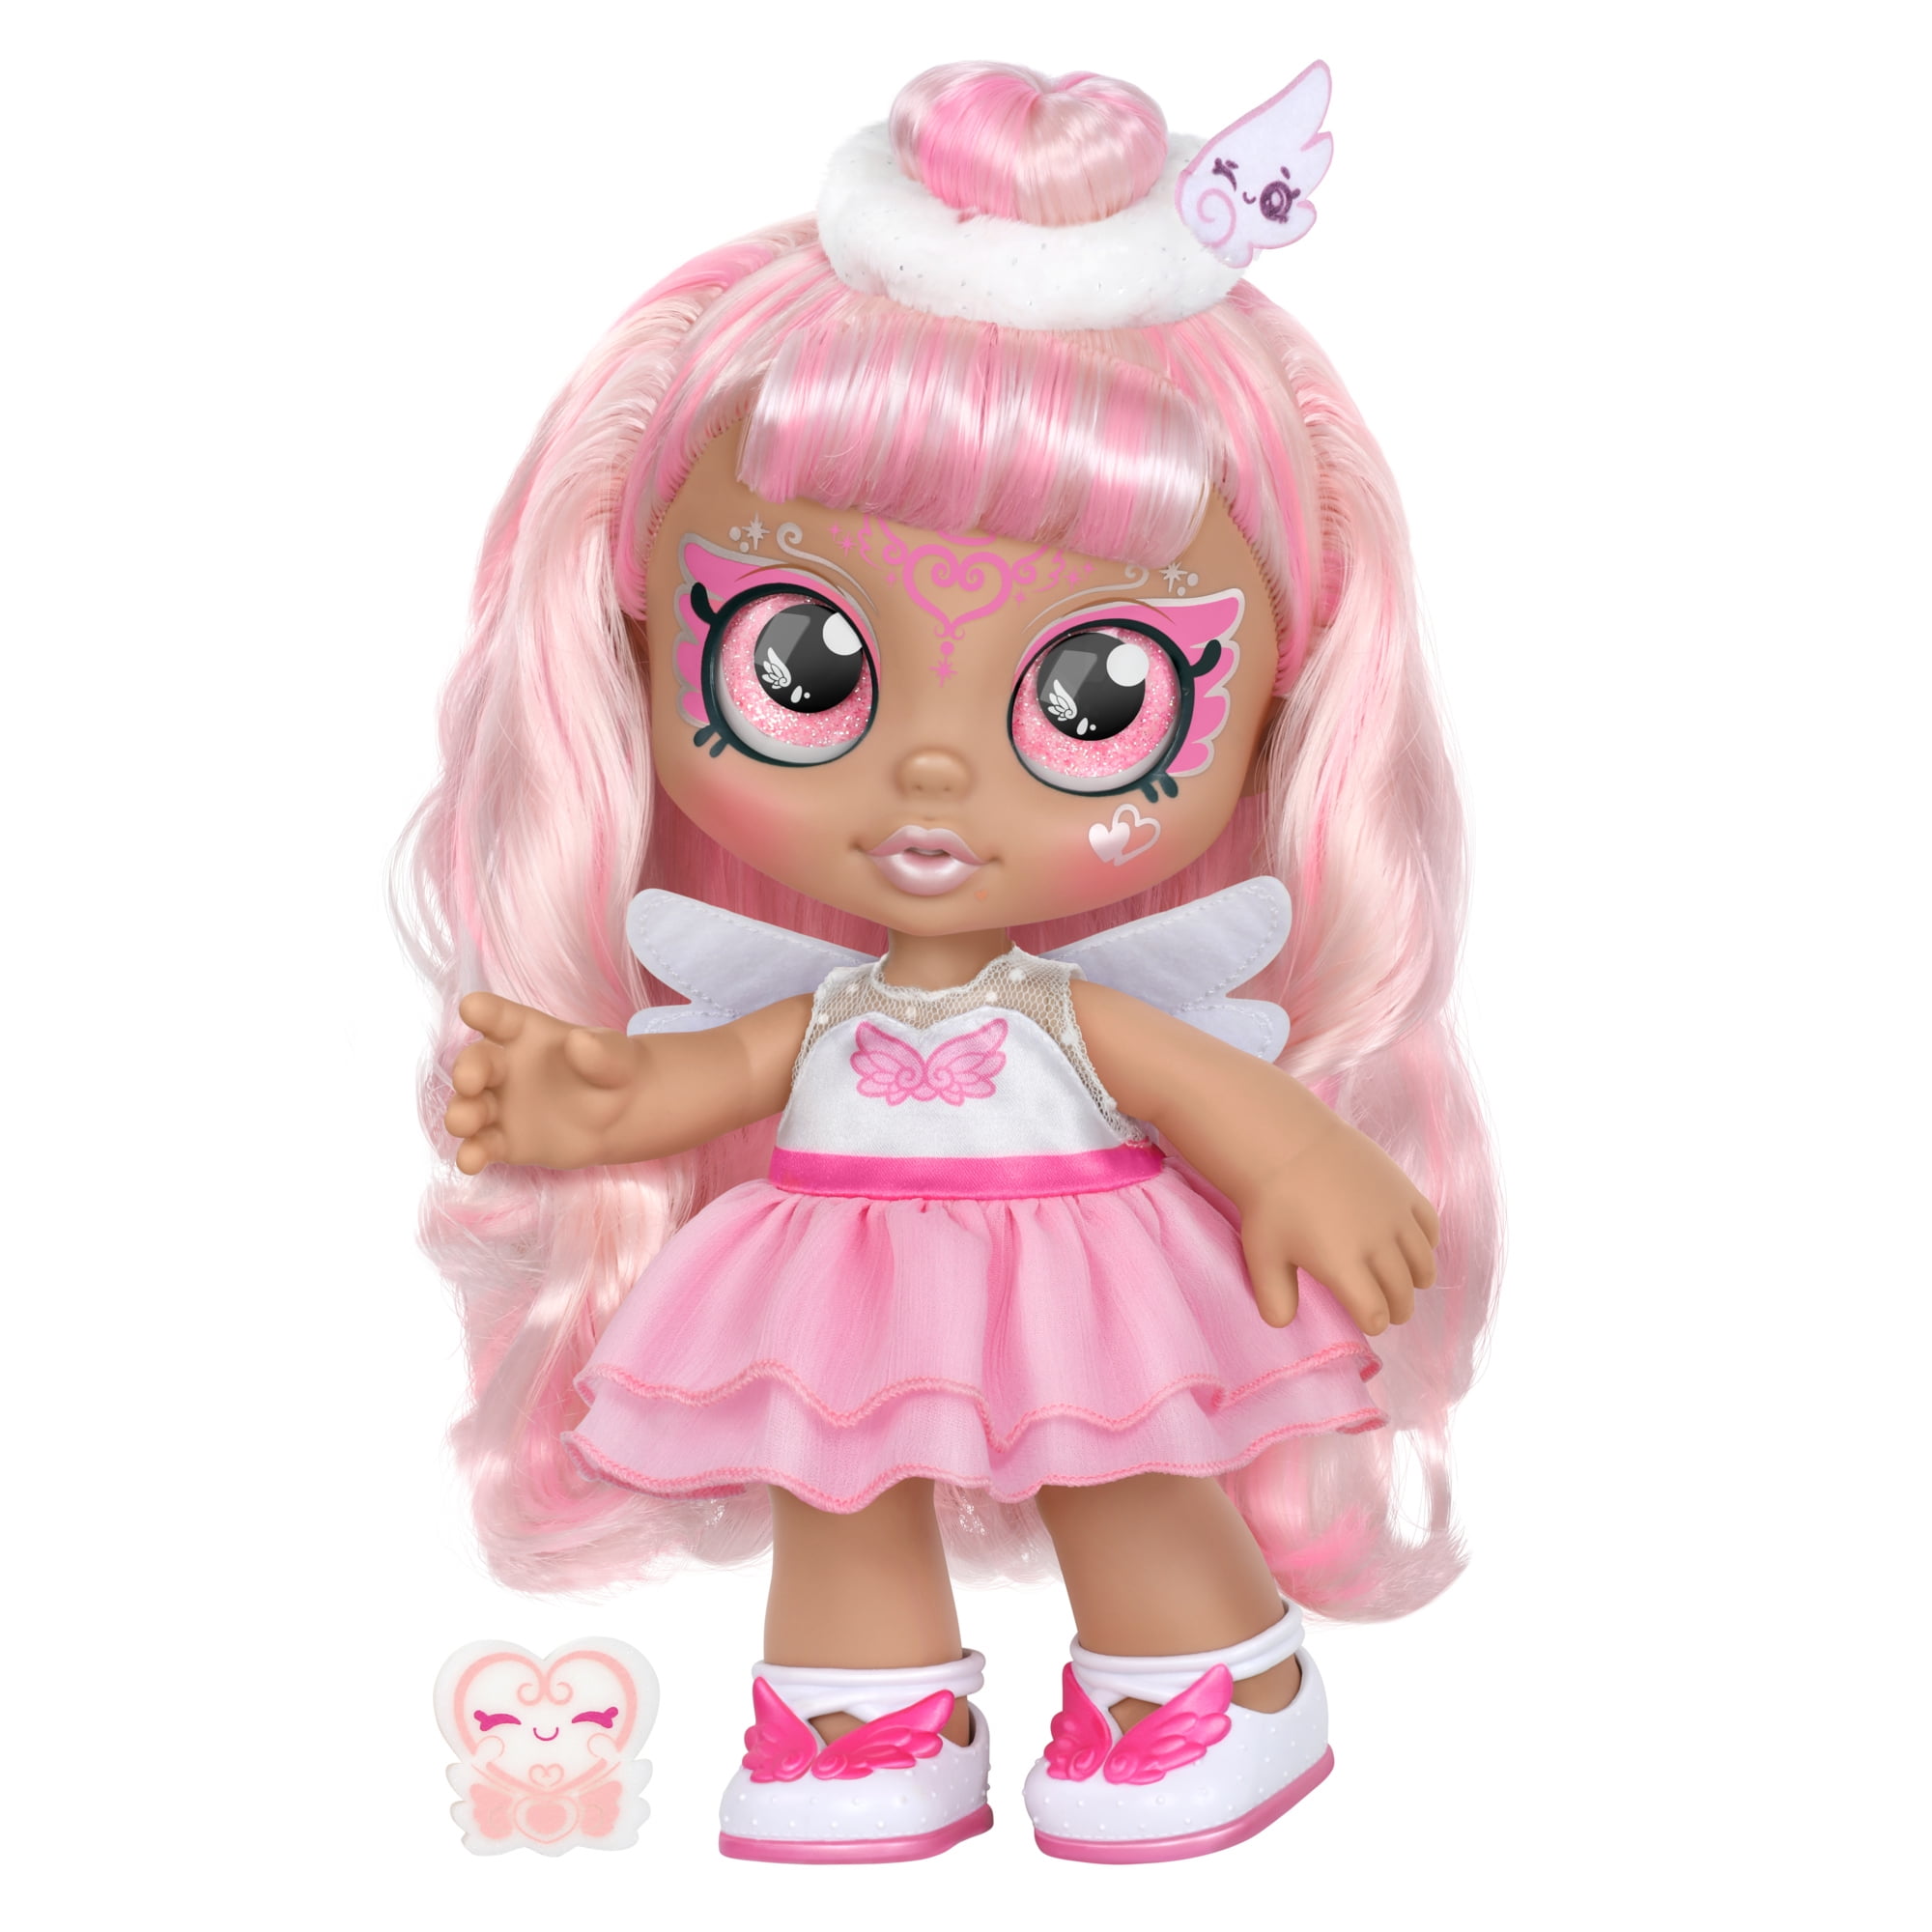 Kindi Kids, Dress up Magic Angelina Wings Angel Baby Doll with Face Paint Reveal, Ages 3+